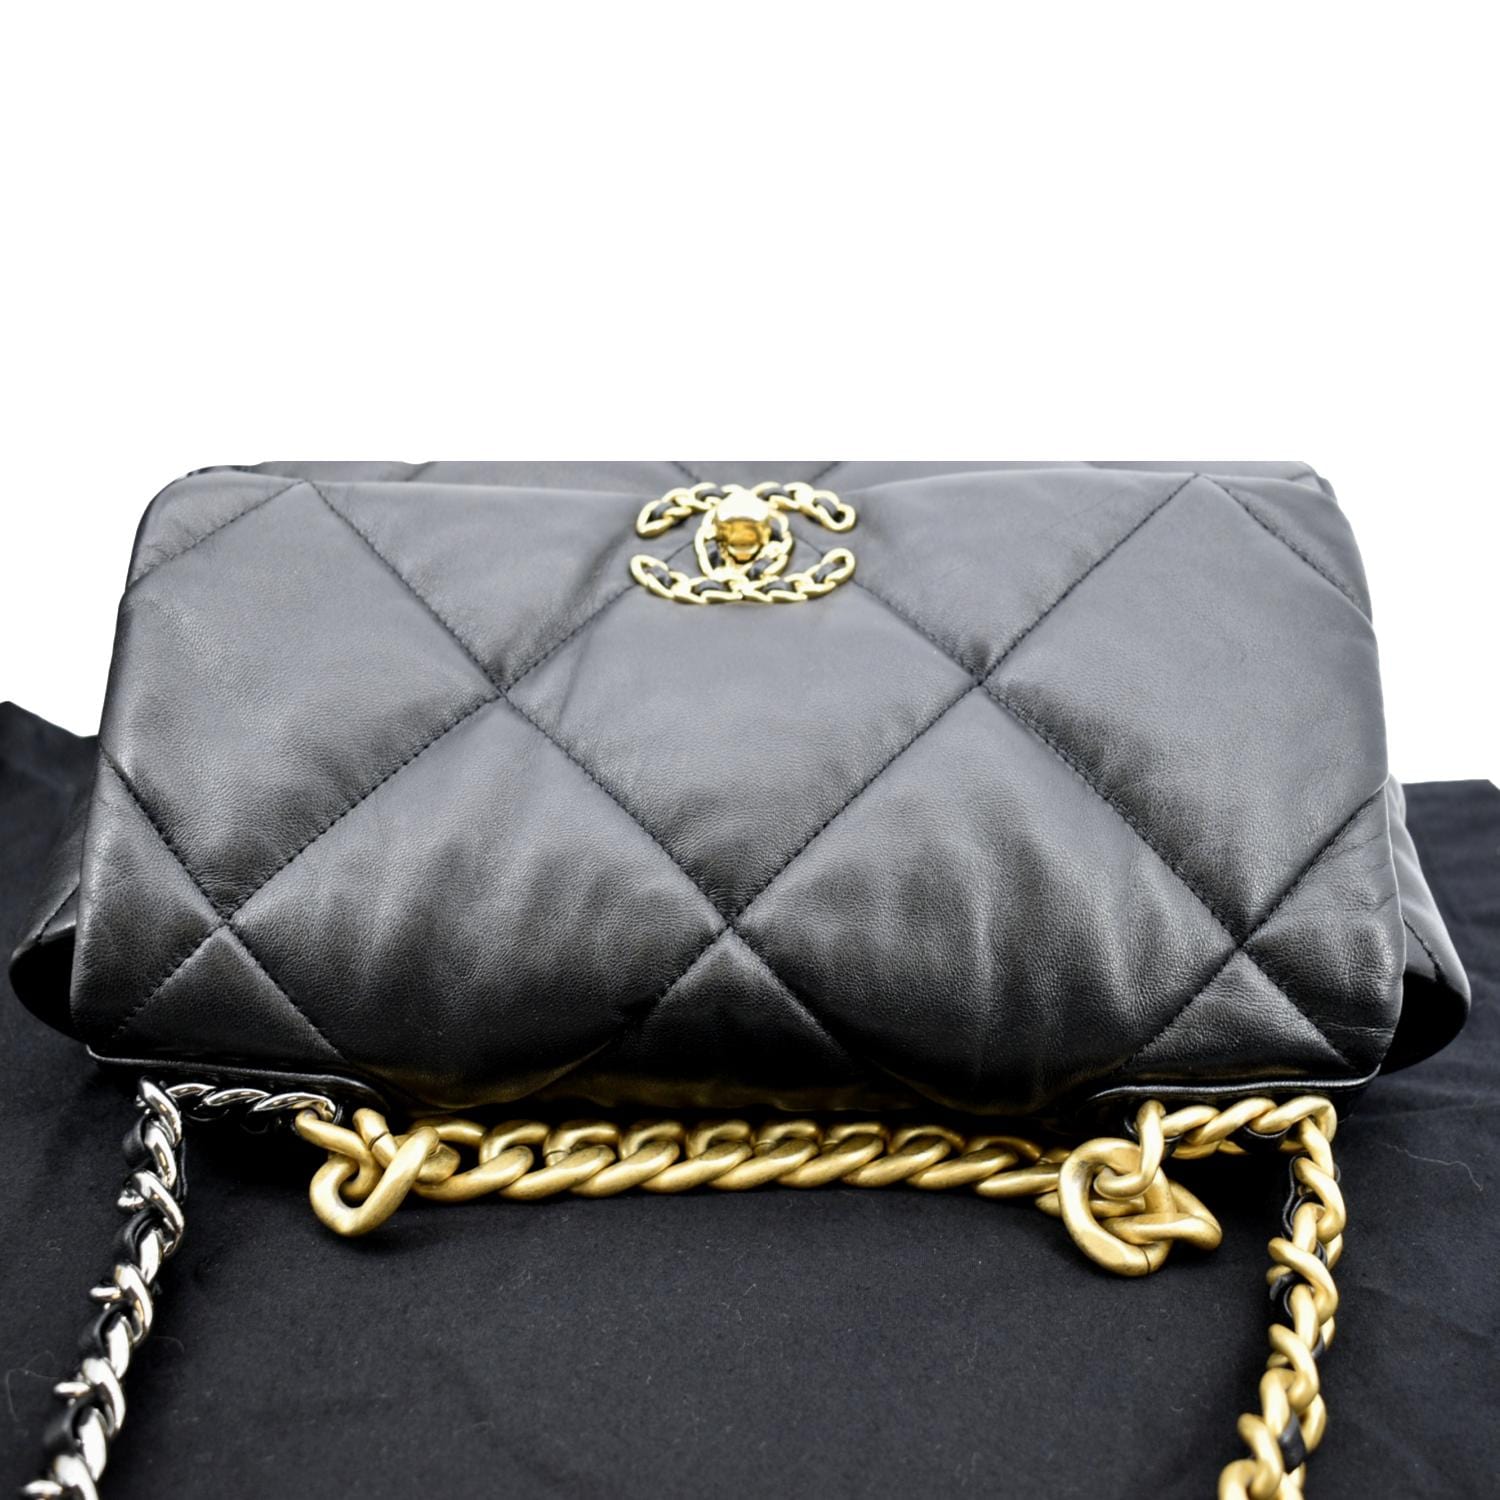 CHANEL, Bags, Chanel Lambskin Deep Red Wallet Dust Bag And Box